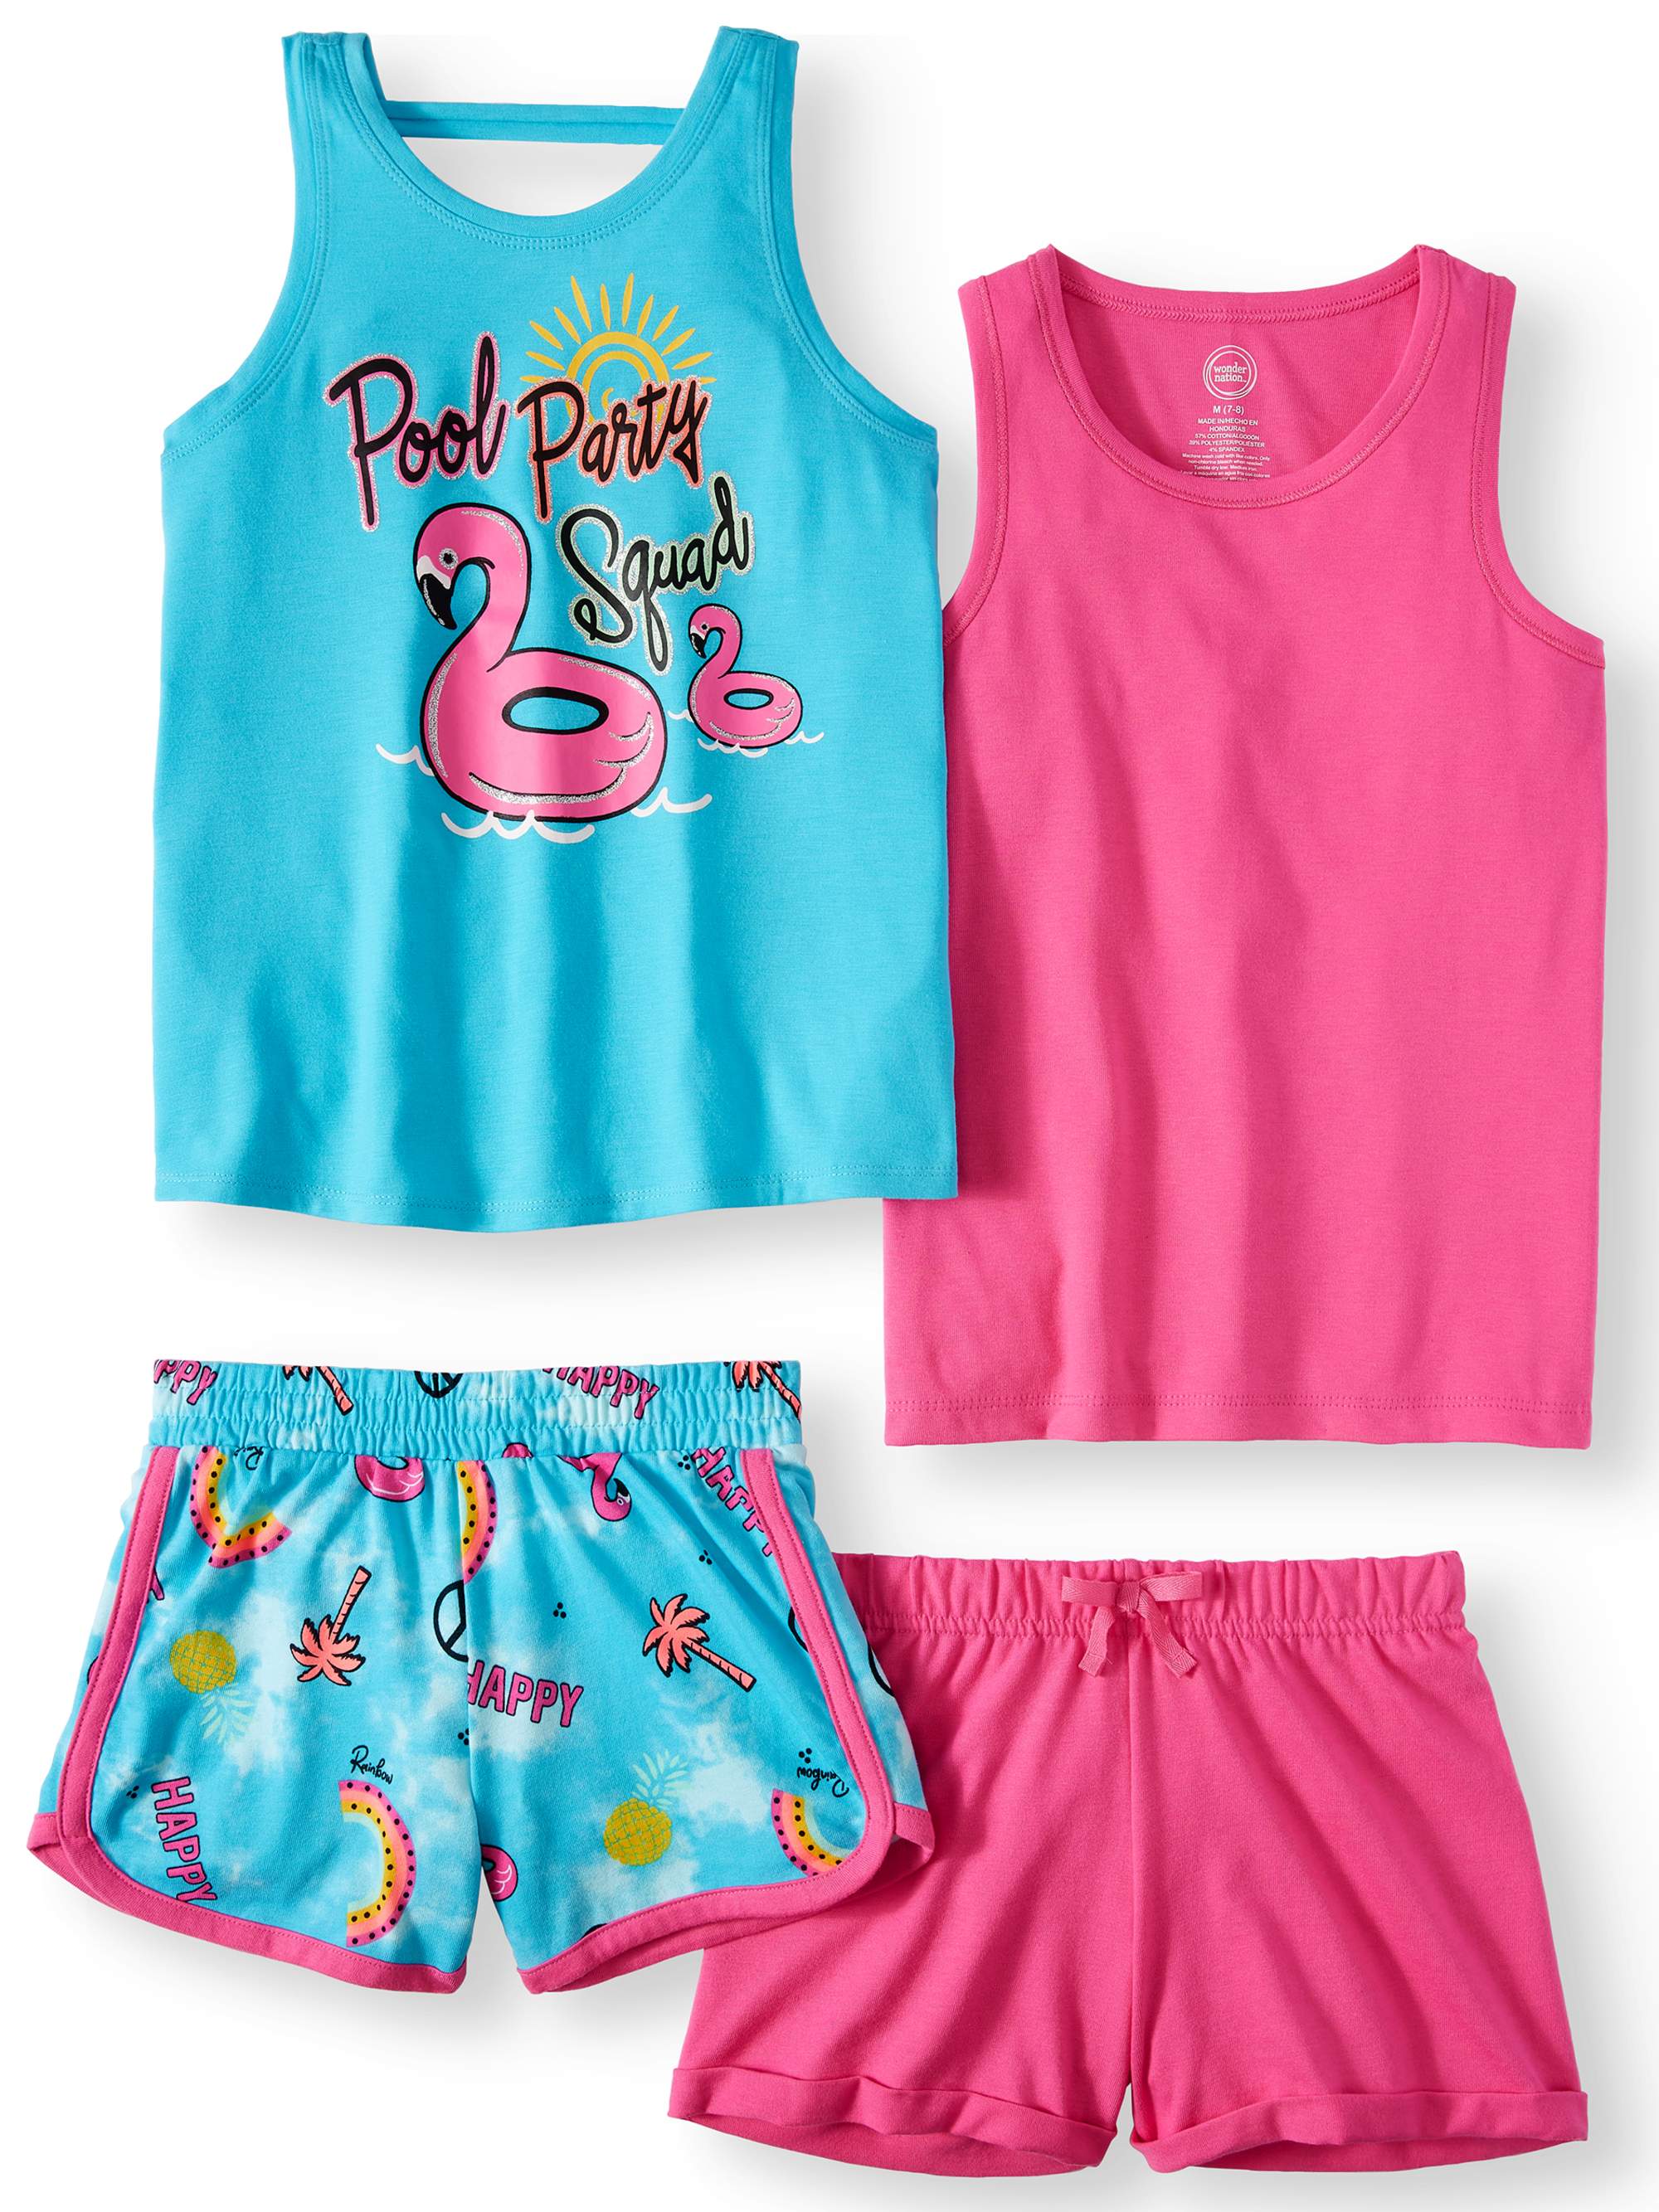 Wonder Nation Girls Graphic Tank Tops and Shorts, 4-Piece Mix and Match Outfit Set, Sizes 4-18 & Plus - image 1 of 4